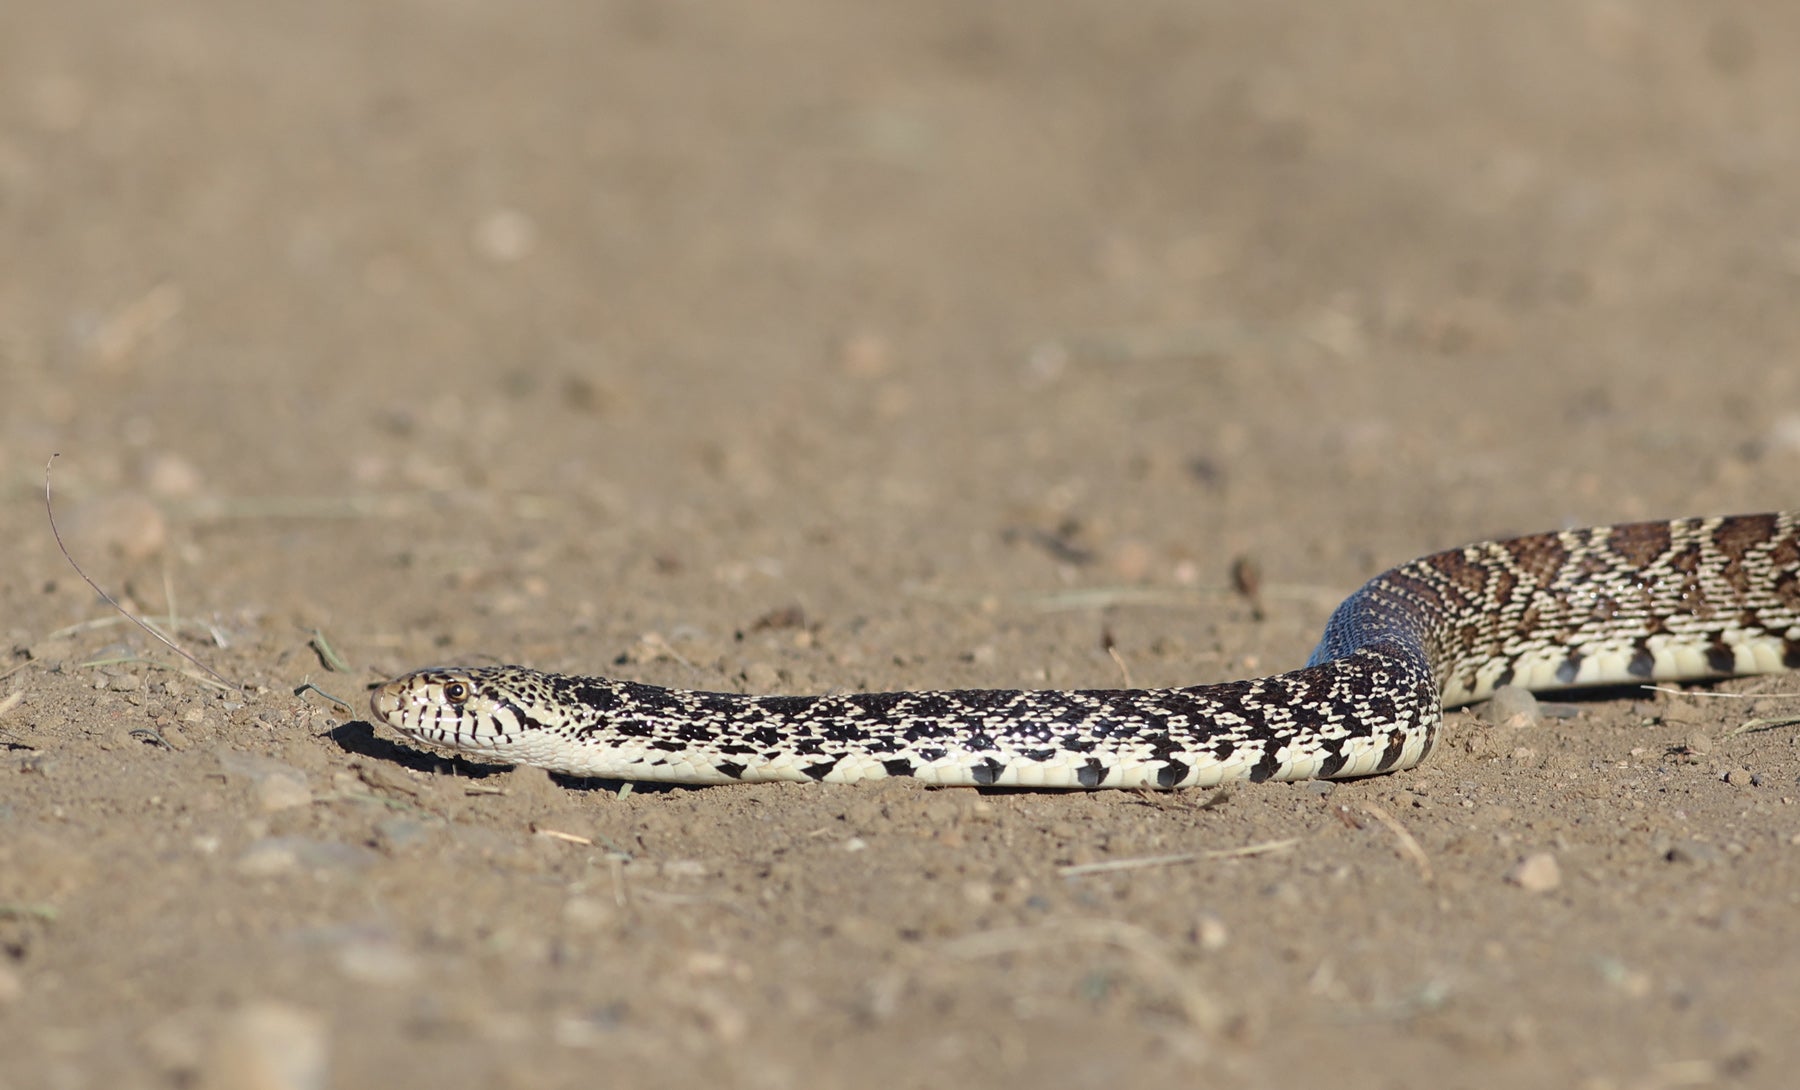 A gopher snake slithering across a dirt road in Phillips County, Montana